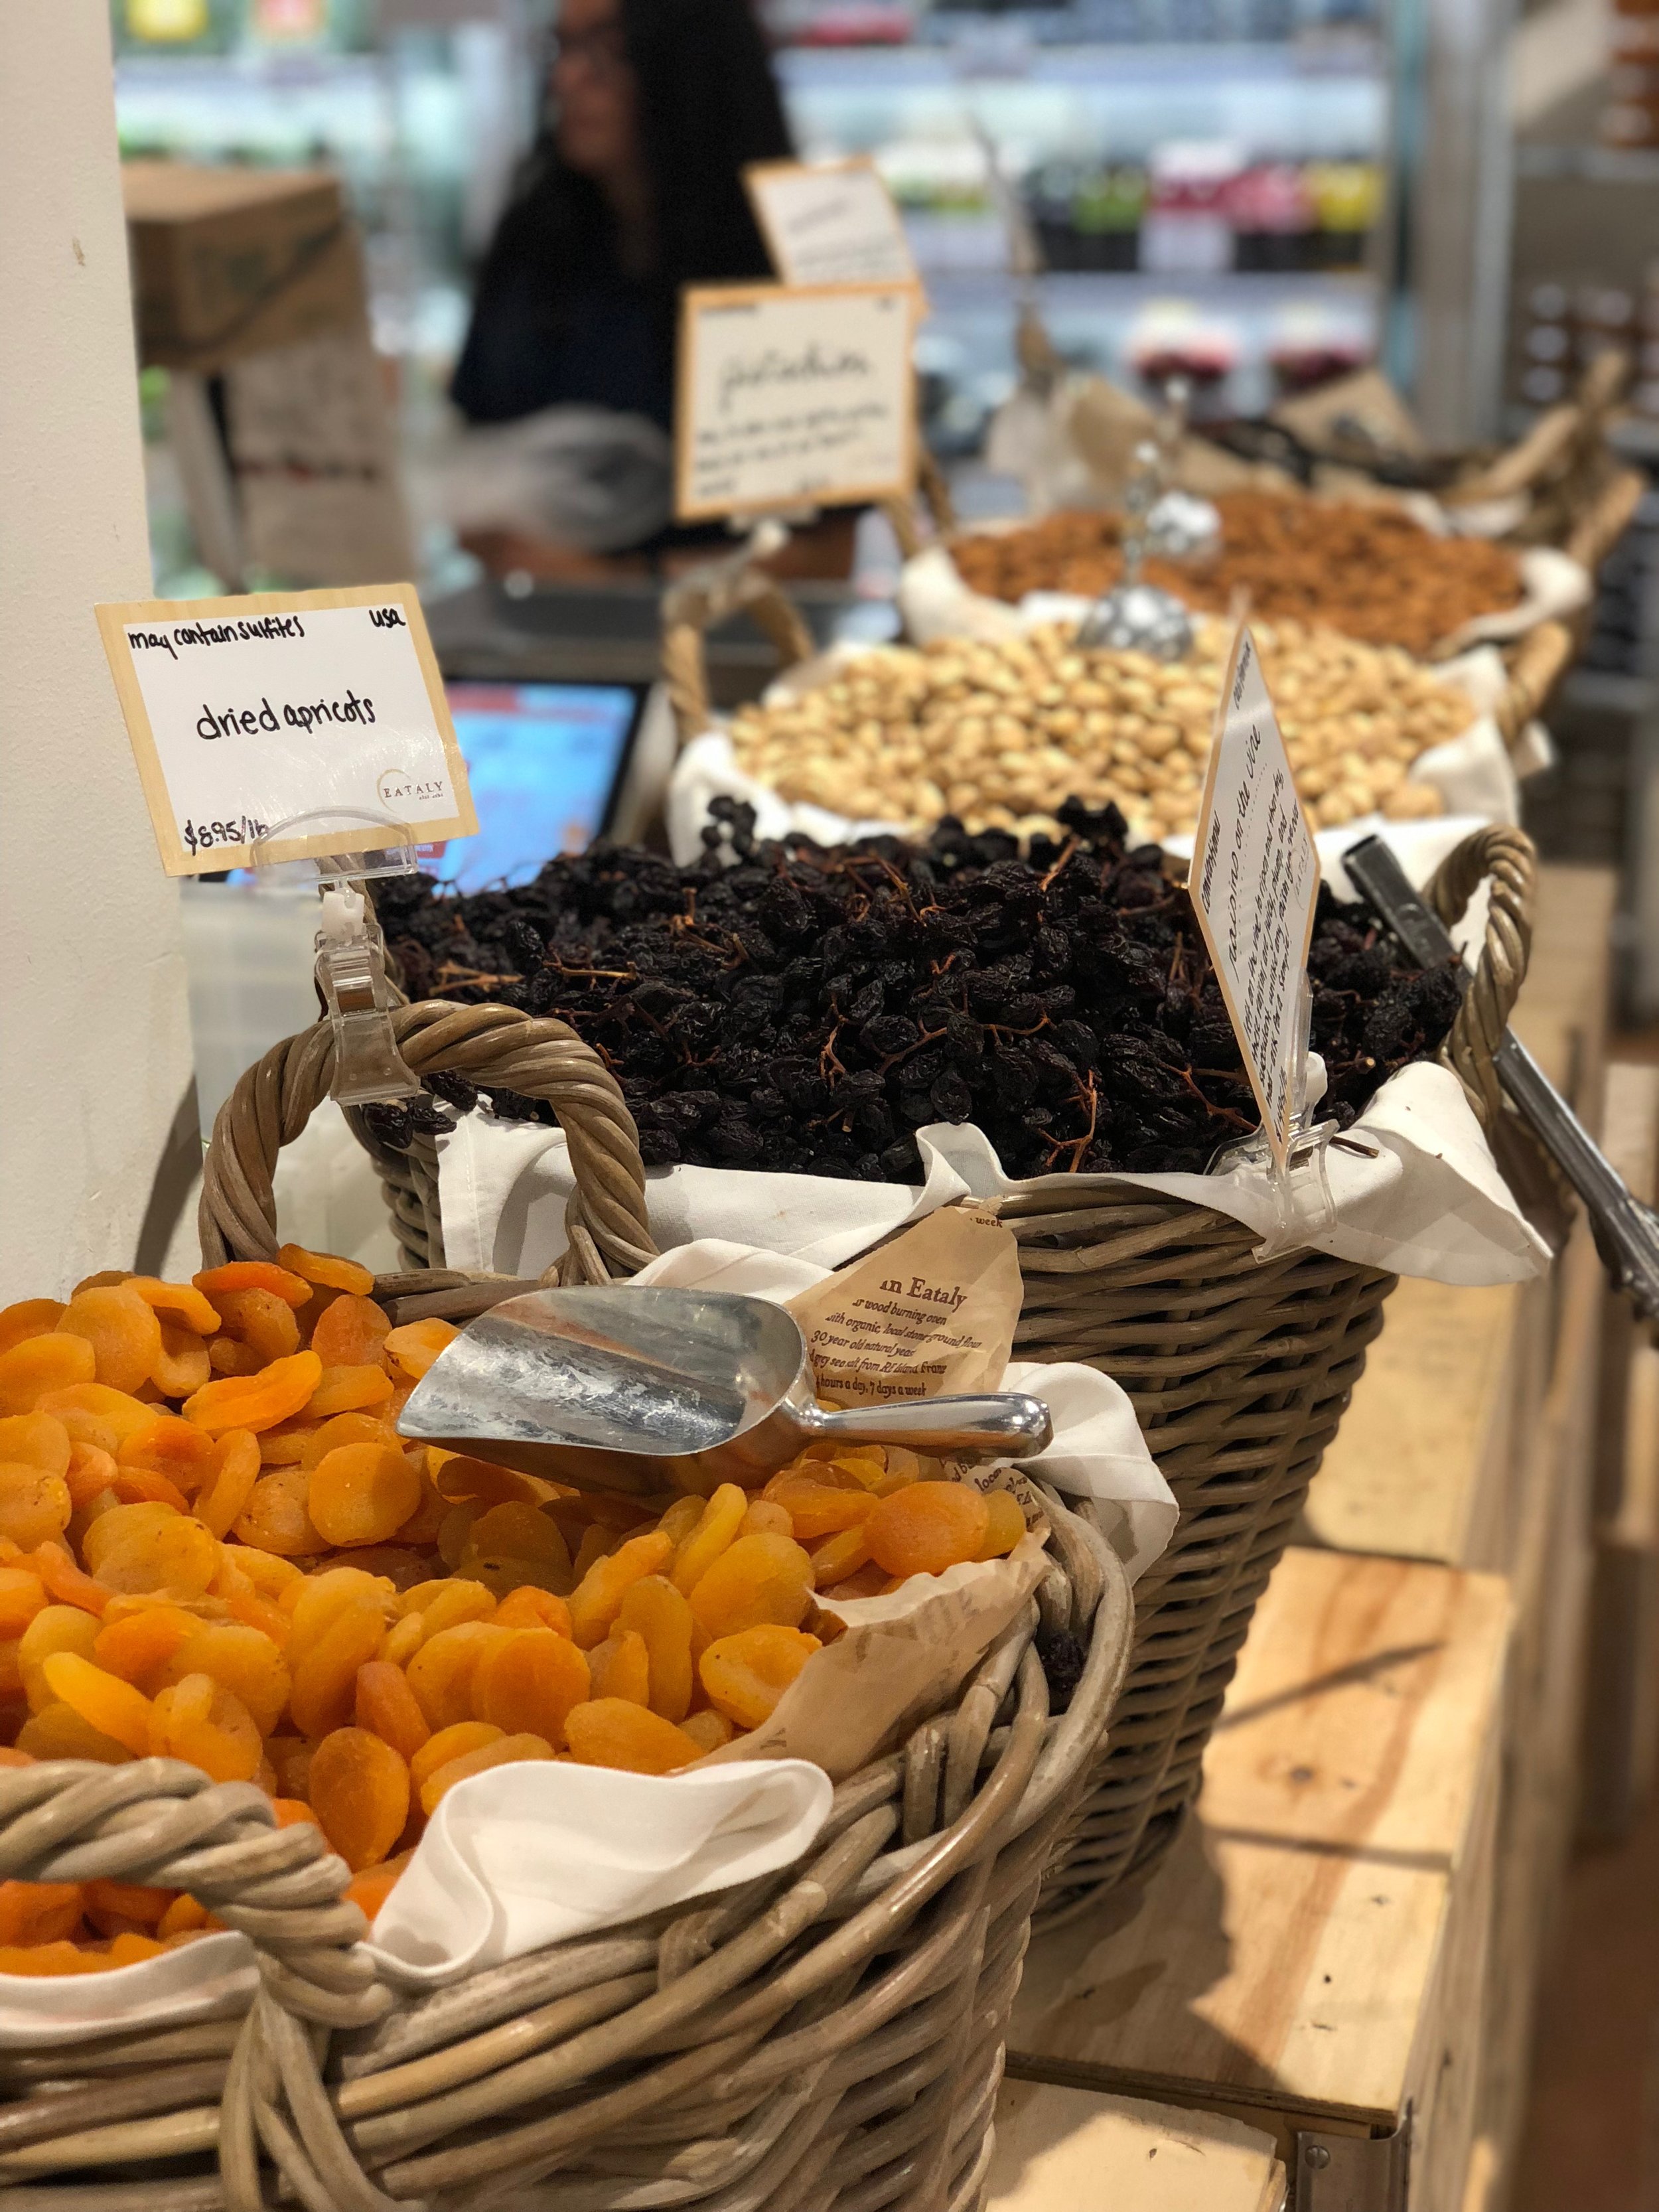 Open market-style presentation of dried fruits and nuts